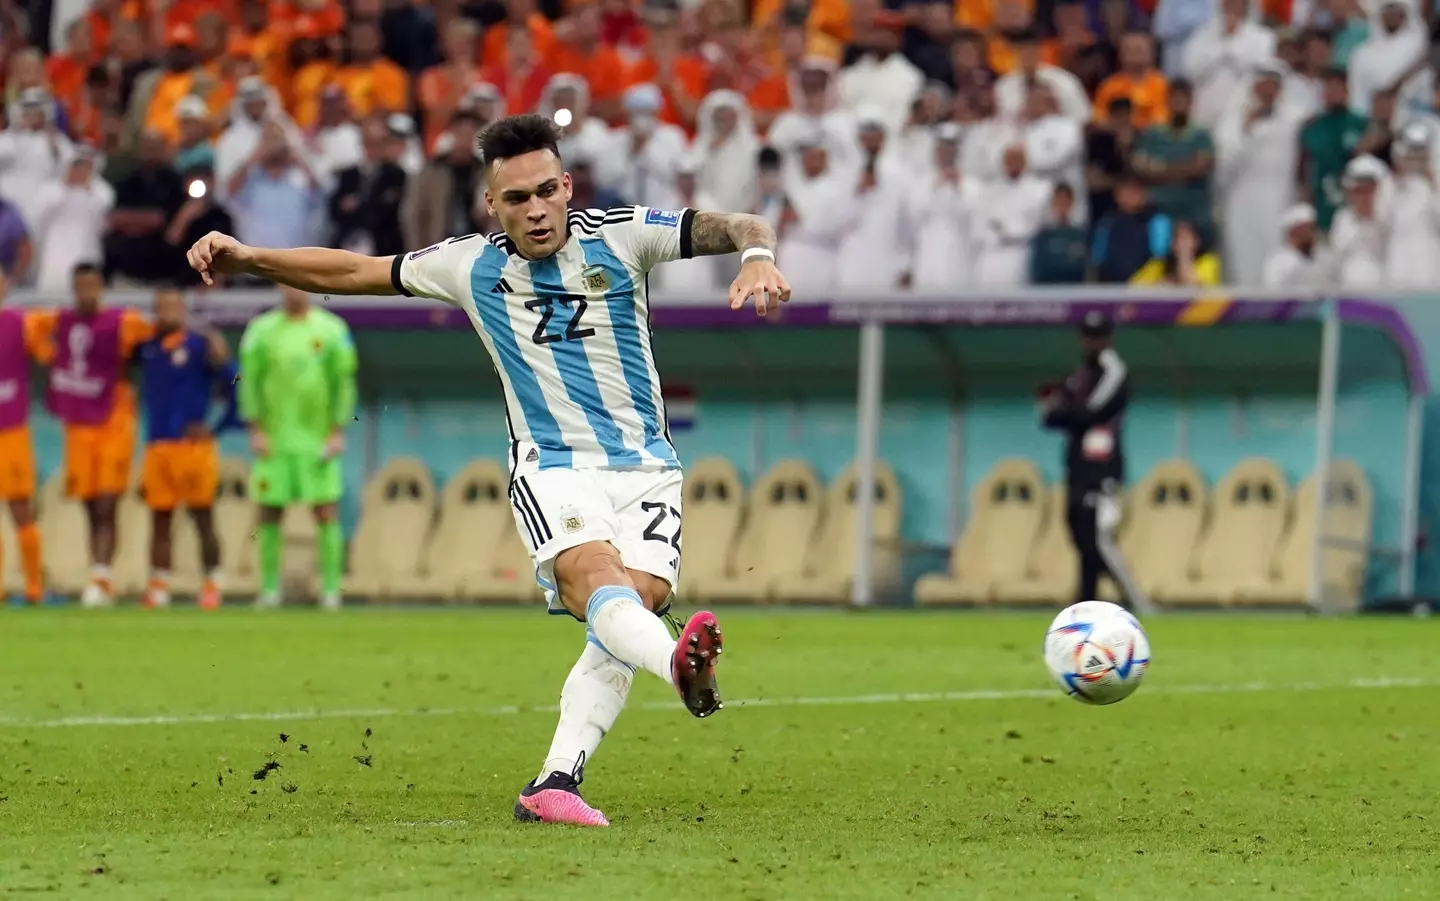 Martinez converted from the spot to give Argentina the victory. (Image